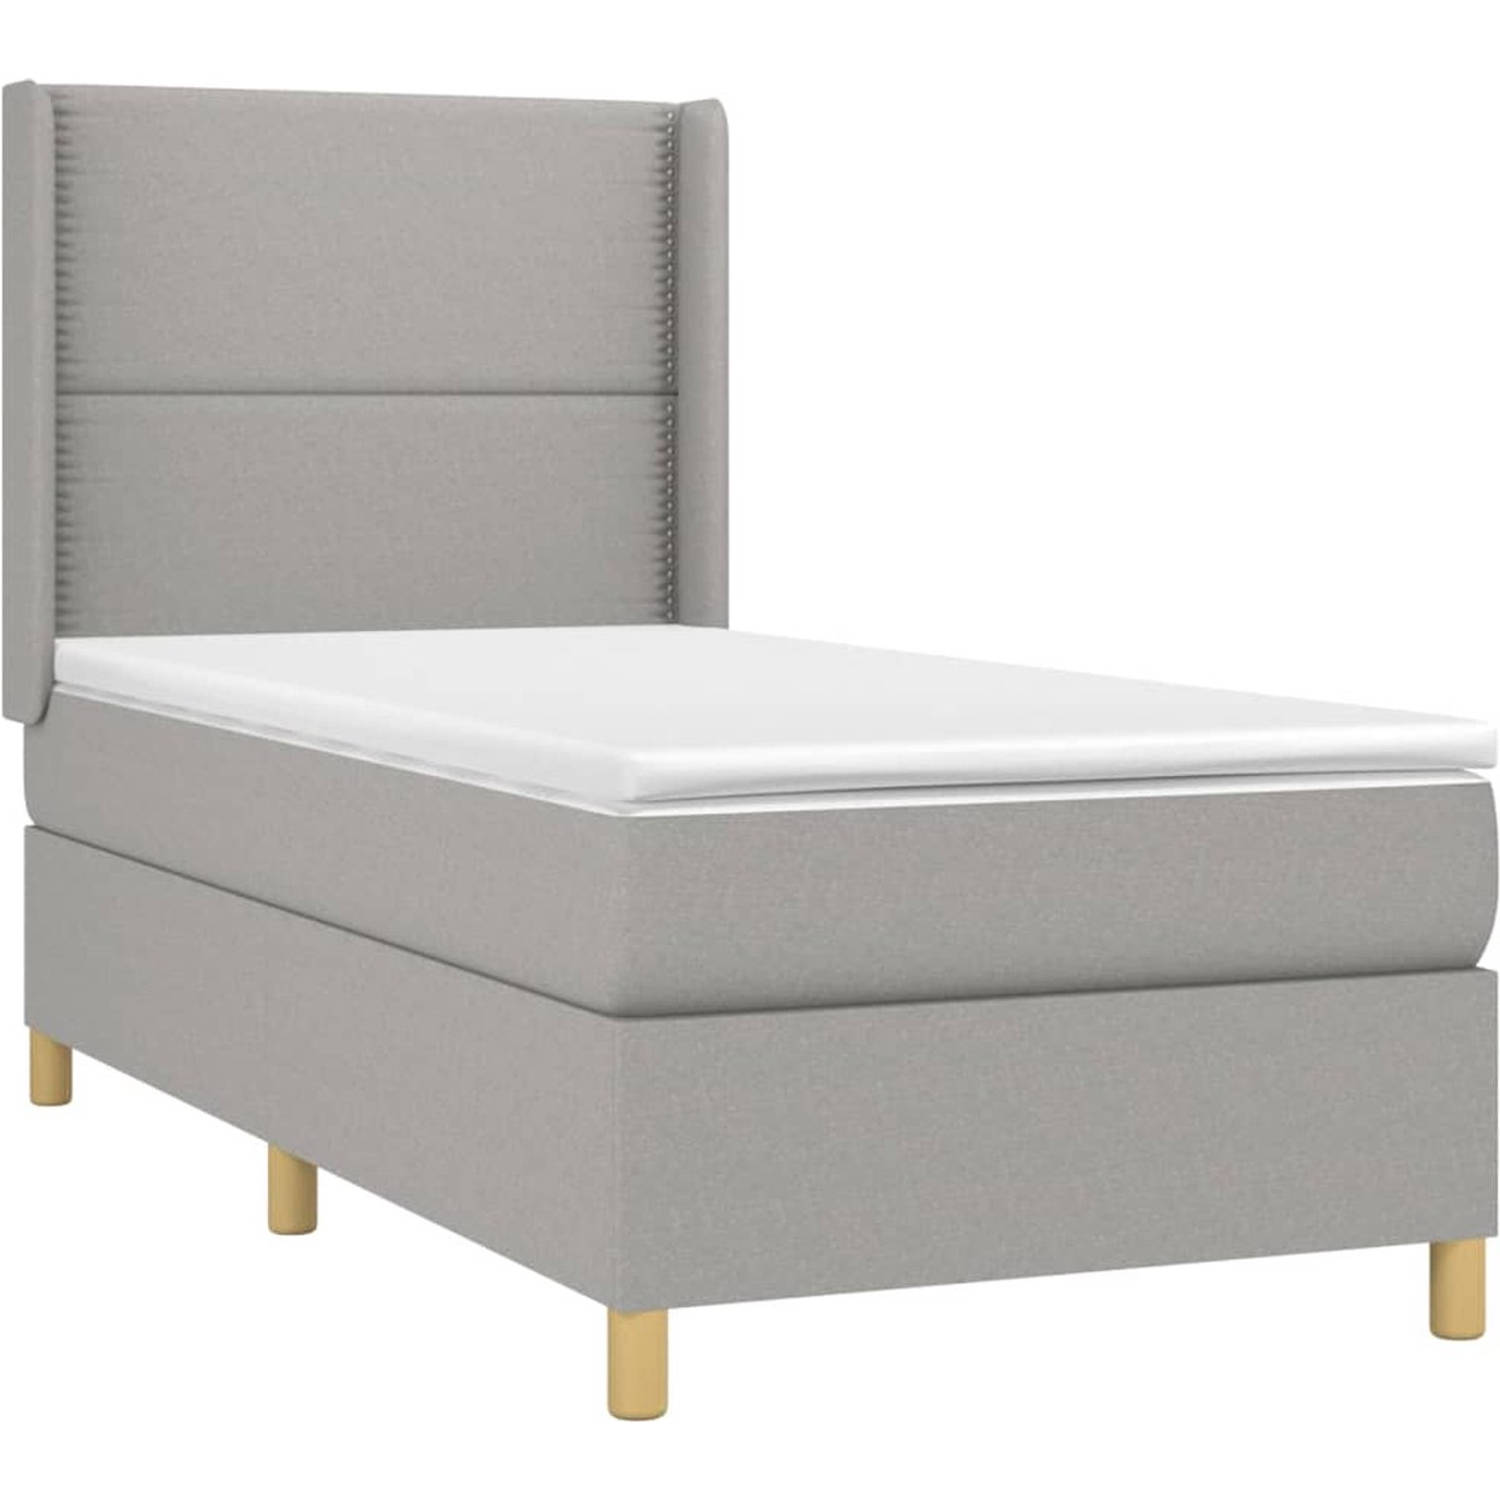 The Living Store Boxspringbed - The Living Store - Bed - 203x93x118/128cm - Lichtgrijs - Pocketvering